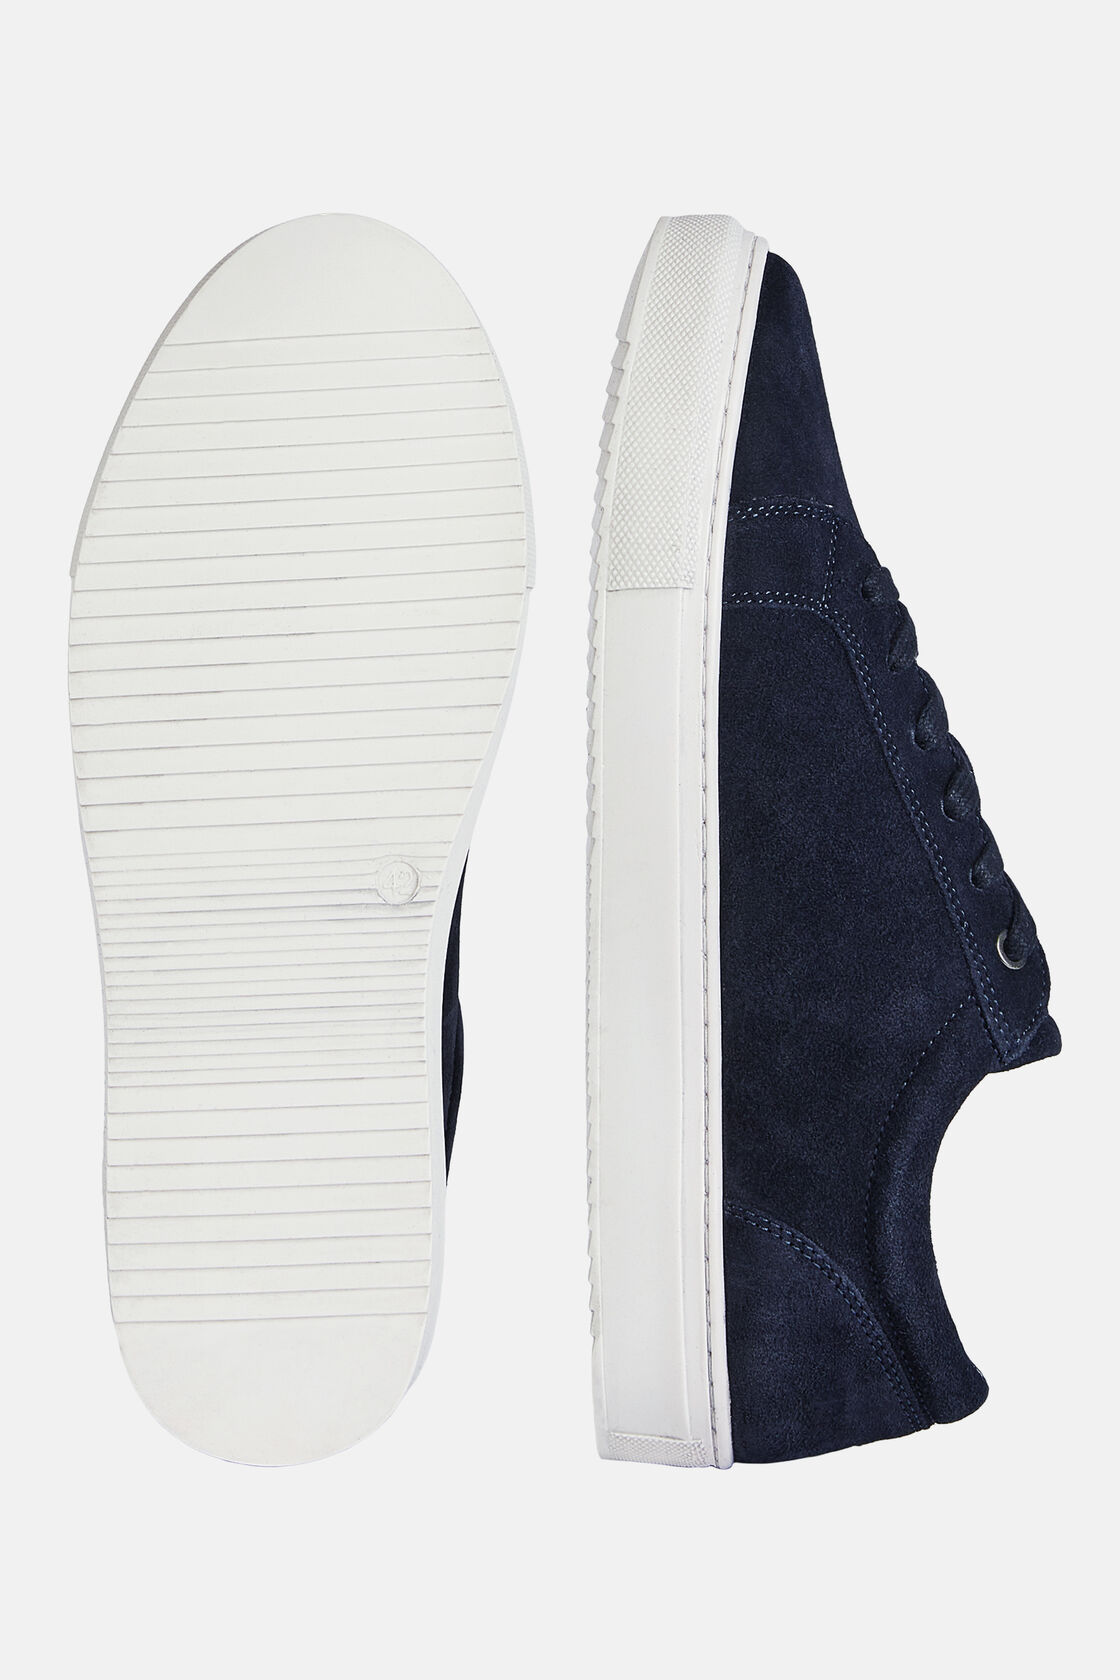 Suede Sneakers With Box Sole, Navy blue, hi-res